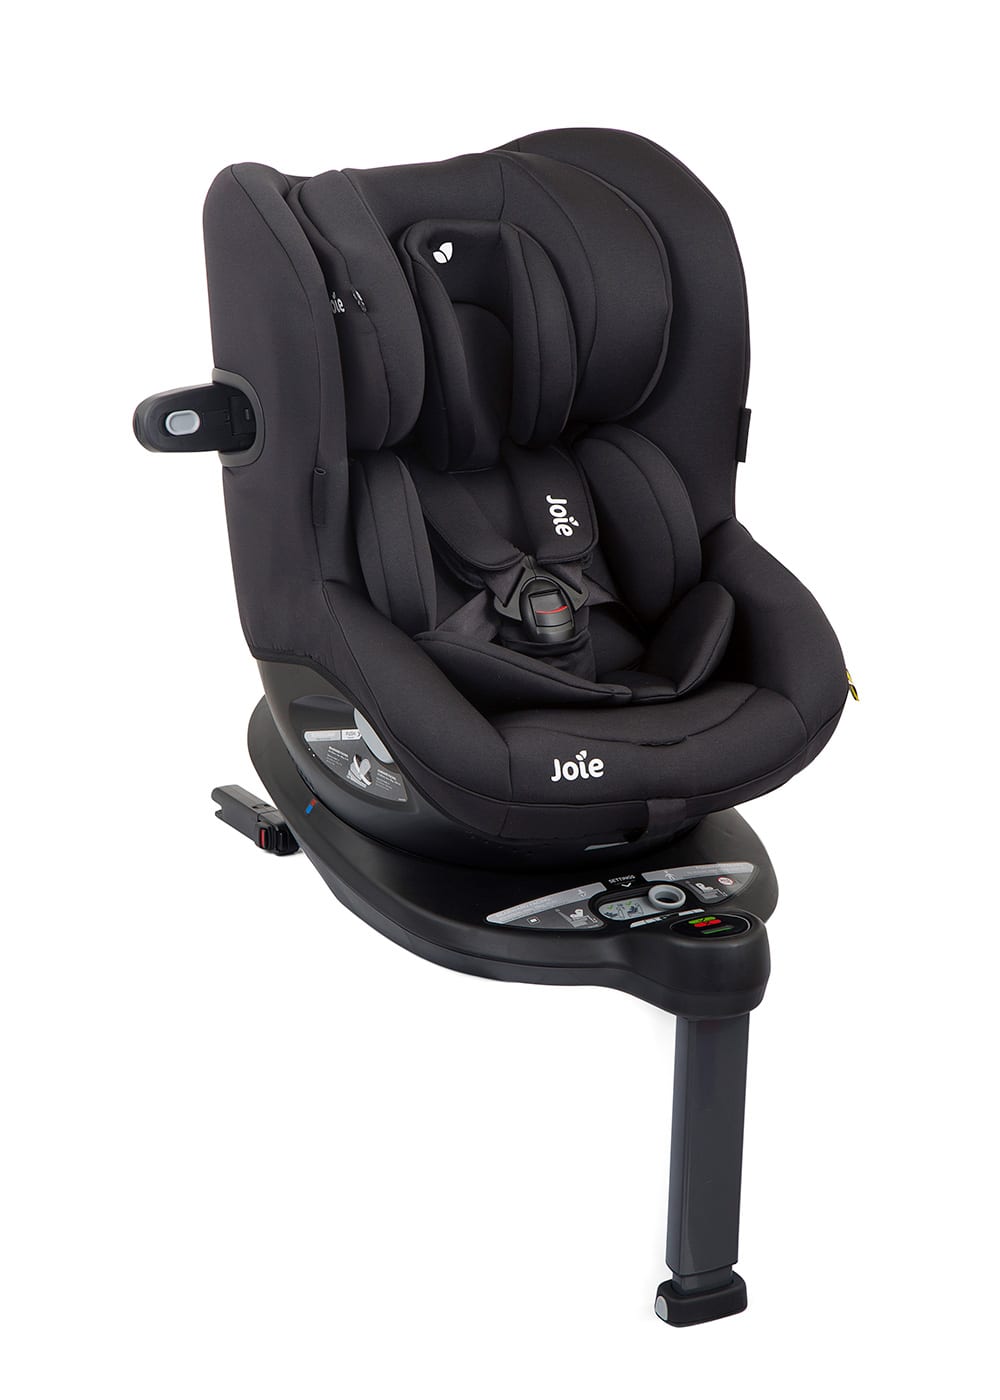 Joie i-Spin 360 car seat